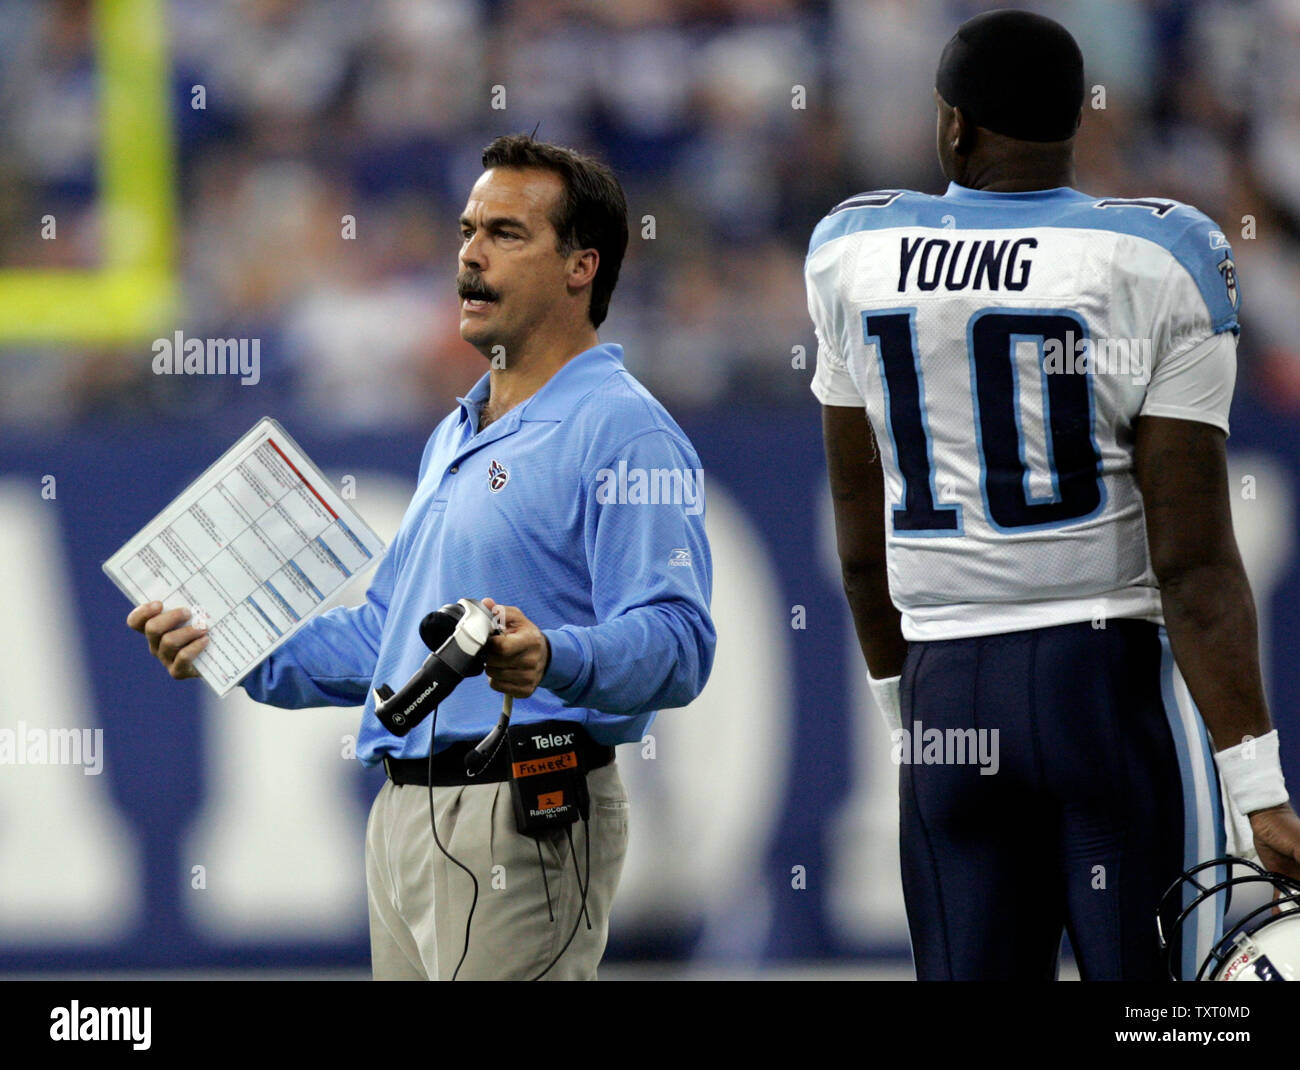 Tennessee Titans head coach Jeff Fisher argues a penalty flag call after quarterback Vince Young (10) called a time-out against the Indianapolis Colts. The Indianapolis Colts defeated the Tennessee Titans 14-13 at the RCA Dome in Indianapolis on October 8, 2006.(UPI Photo/Mark Cowan) Stock Photo